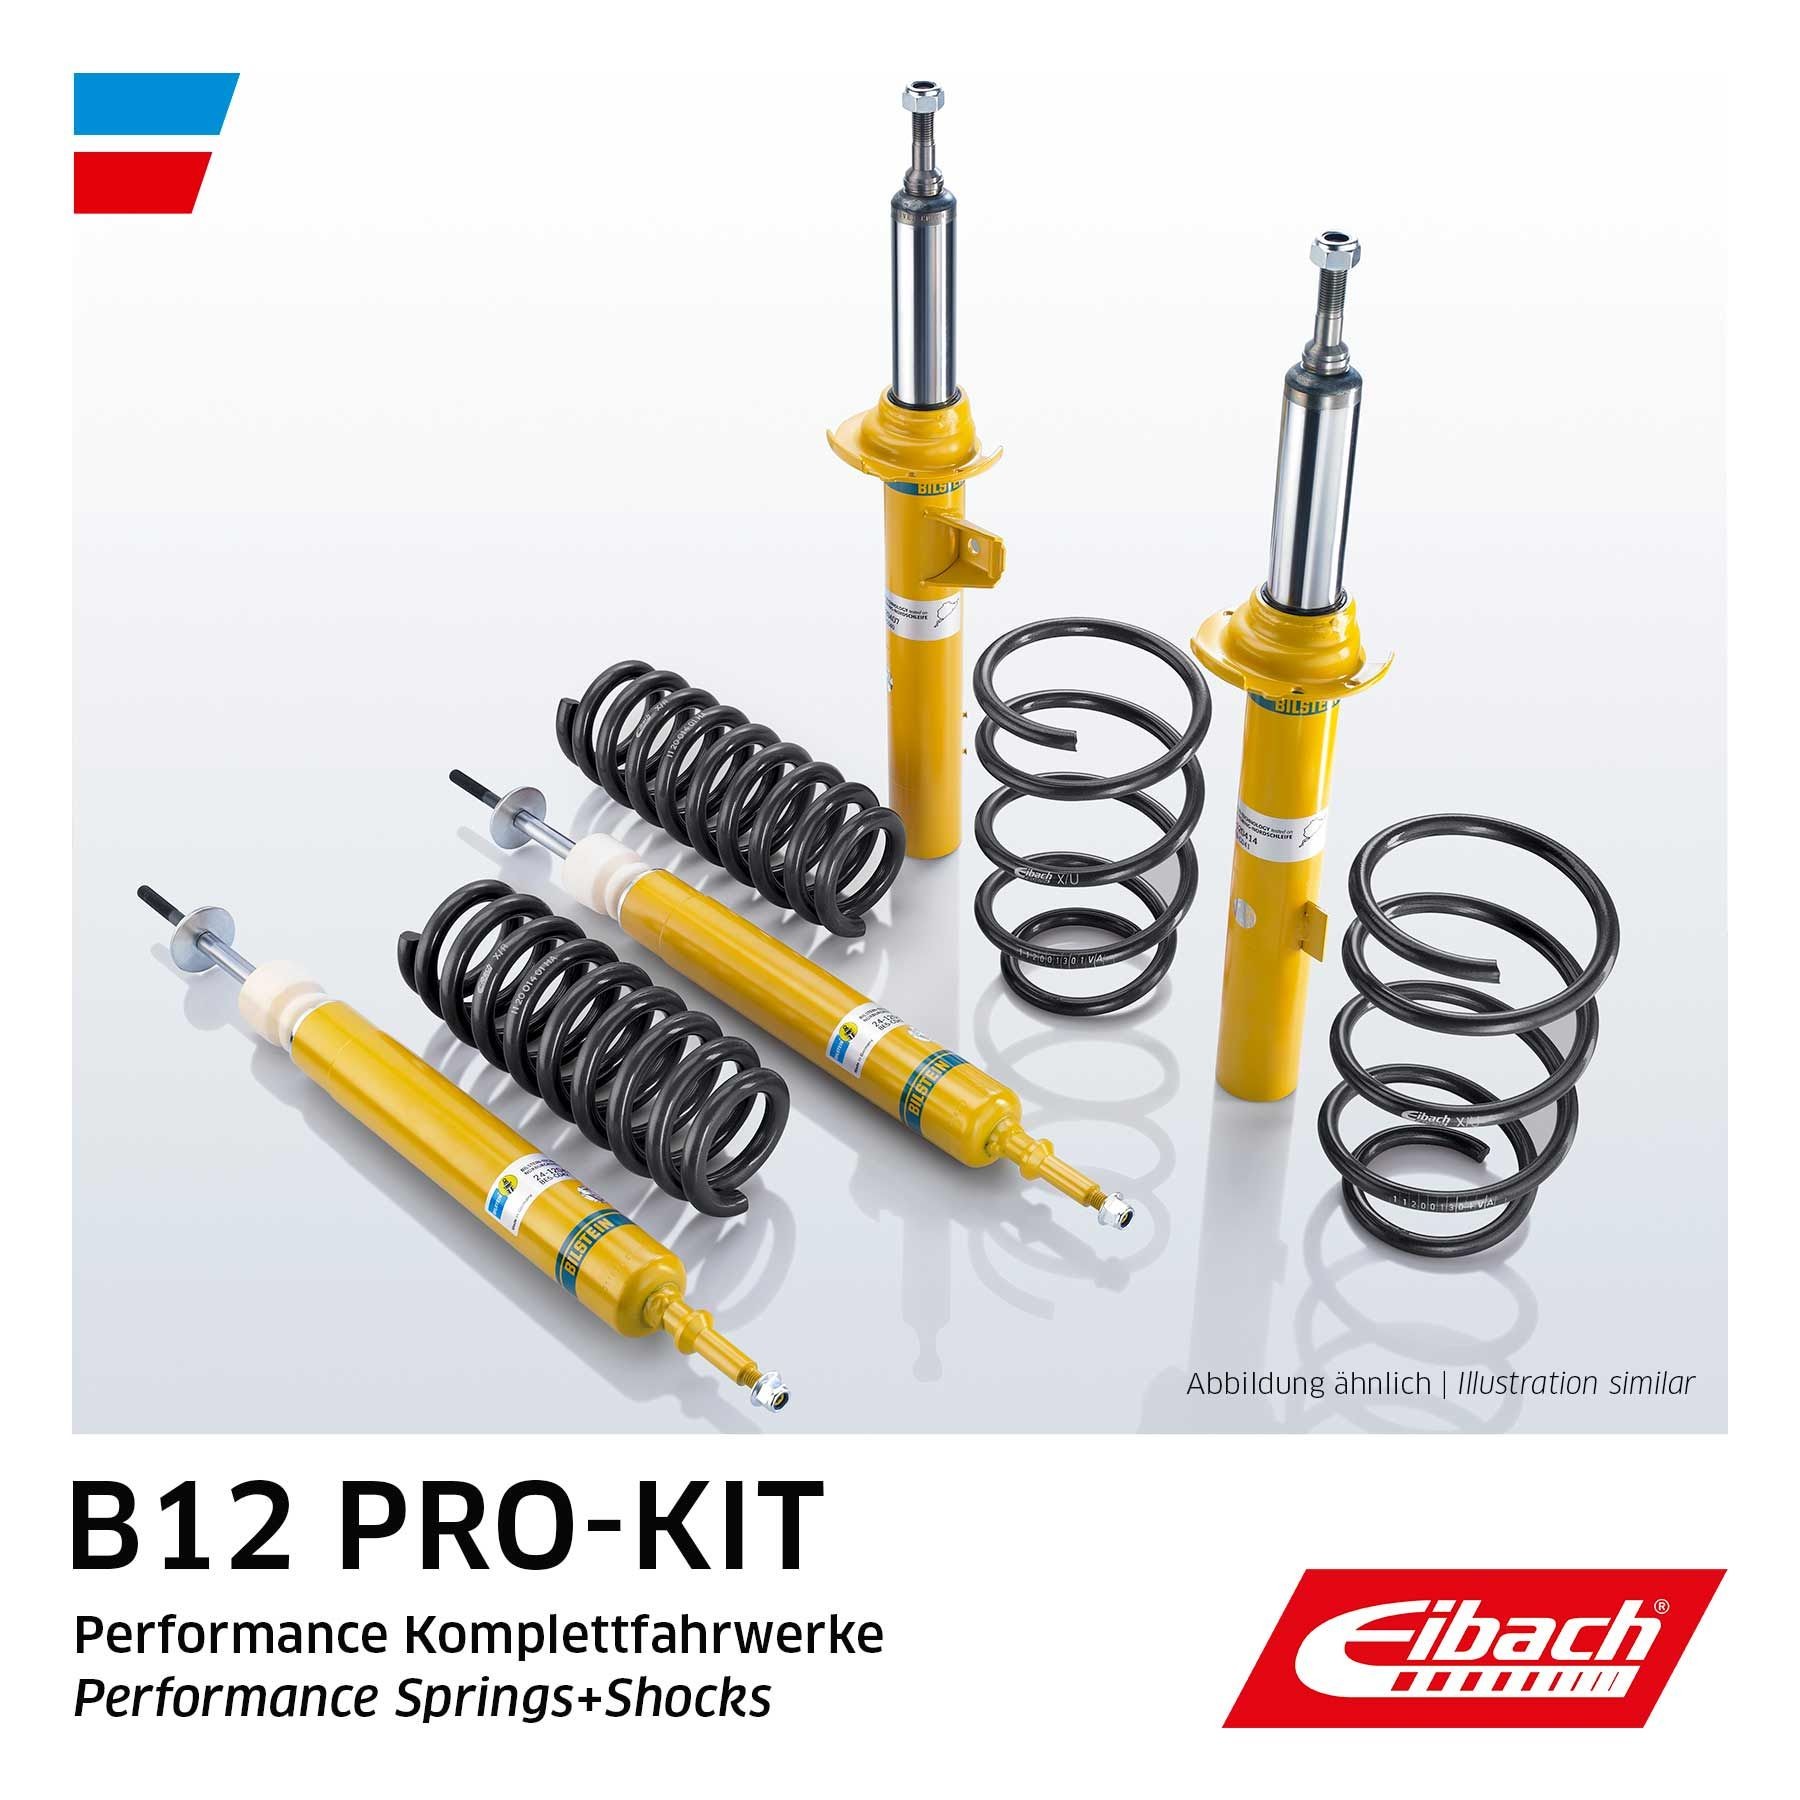 EIBACH Suspension kit, coil springs / shock absorbers W210 new E90-25-019-04-22